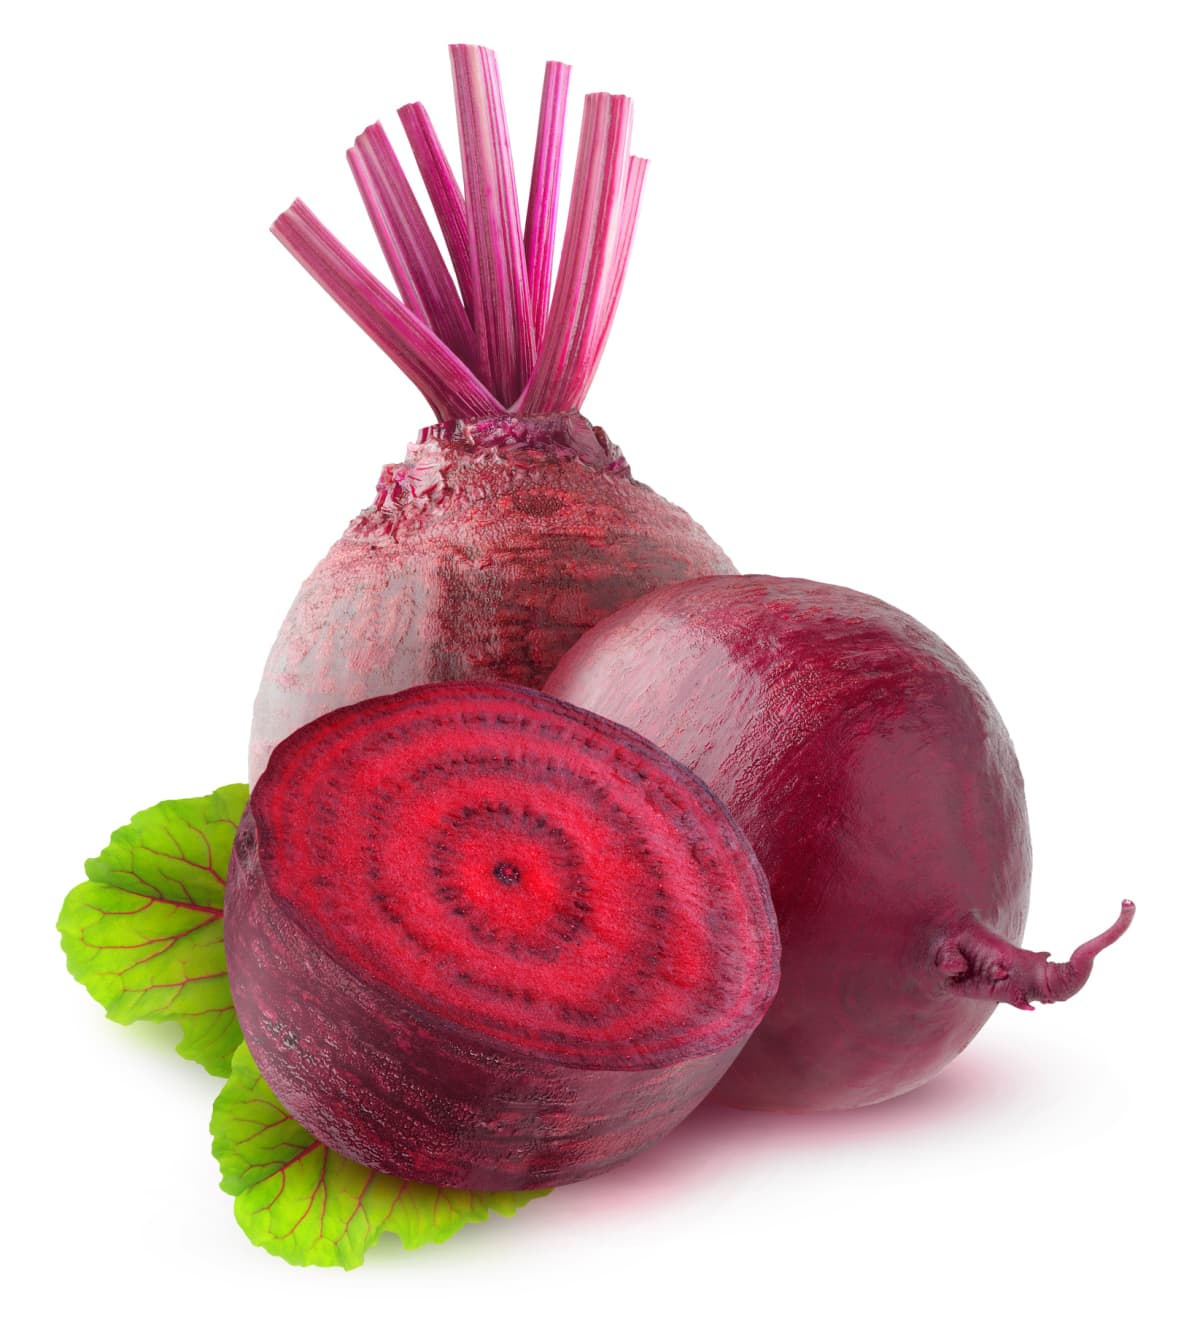 Sliced up beets on a white background